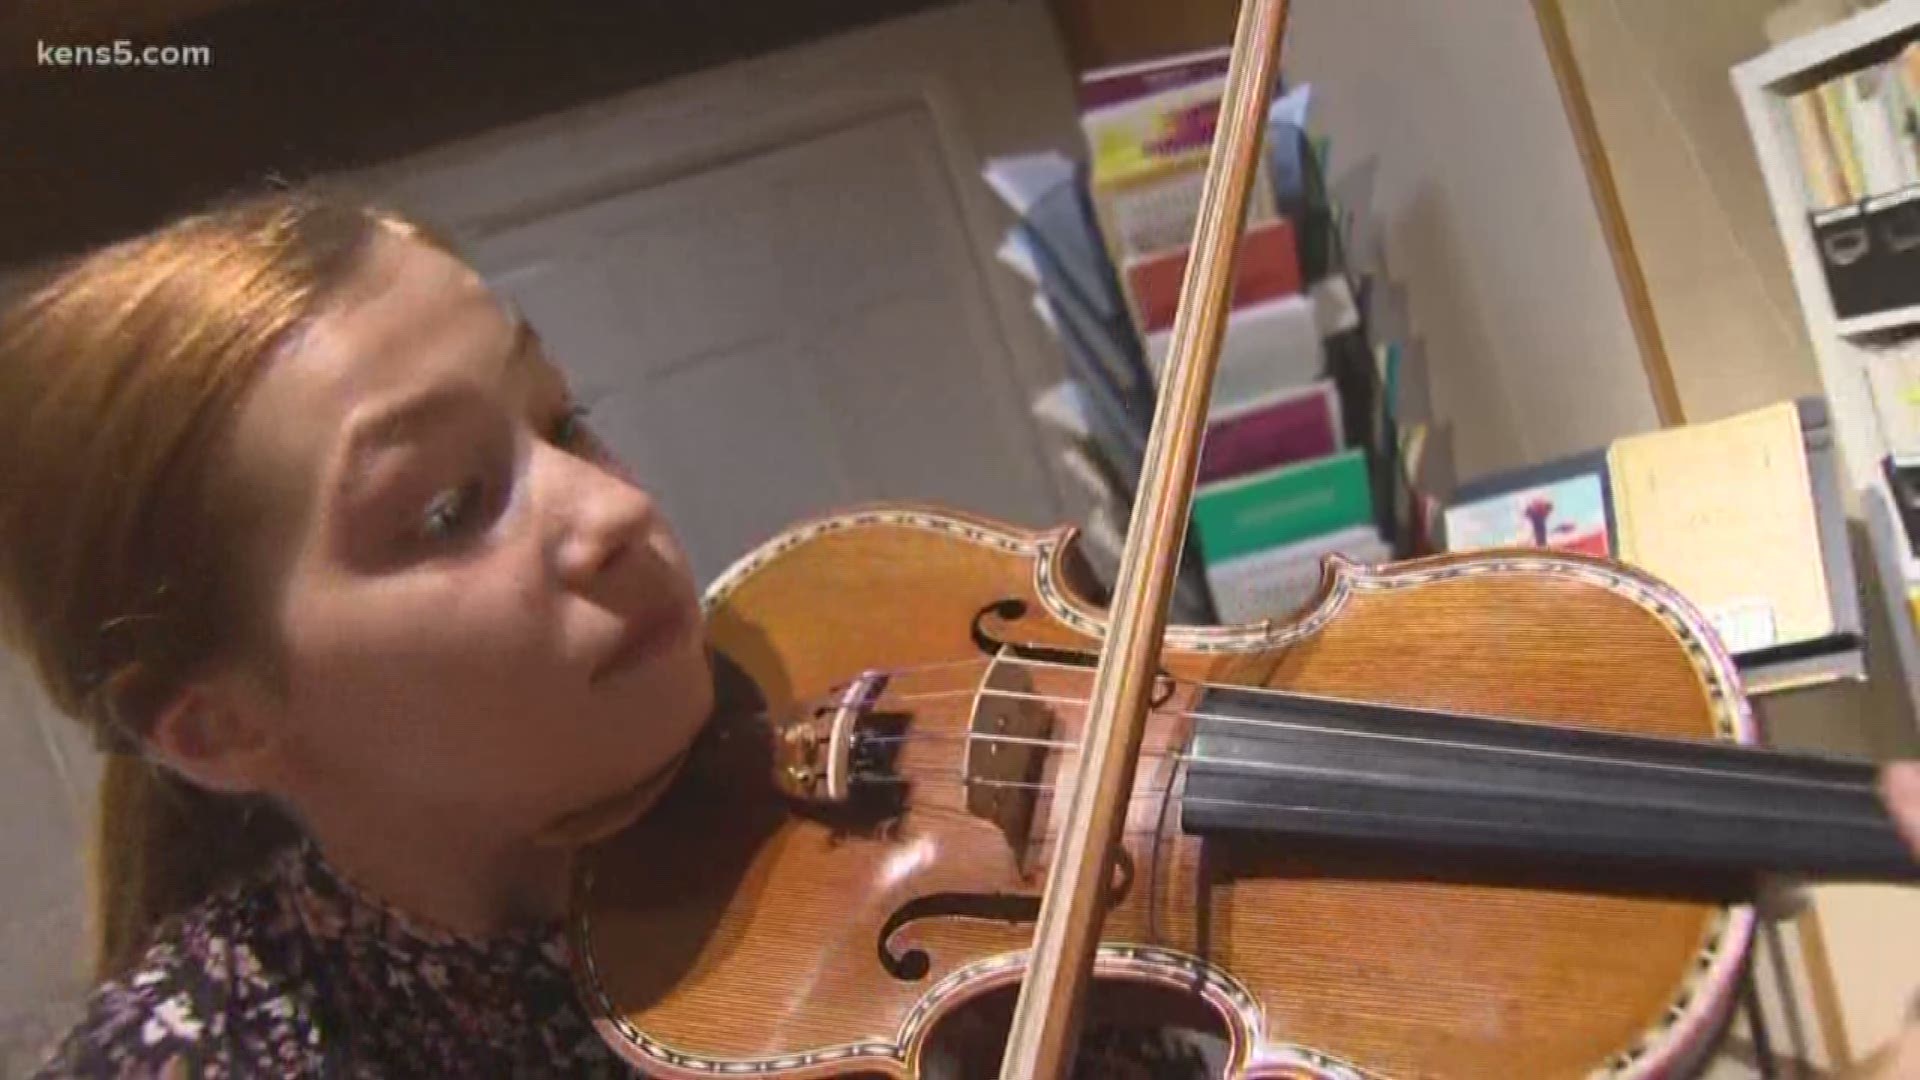 A 13-year-old violinist from the San Antonio area was chosen for a prestigious performance in Los Angeles playing with violinists from the around the world.